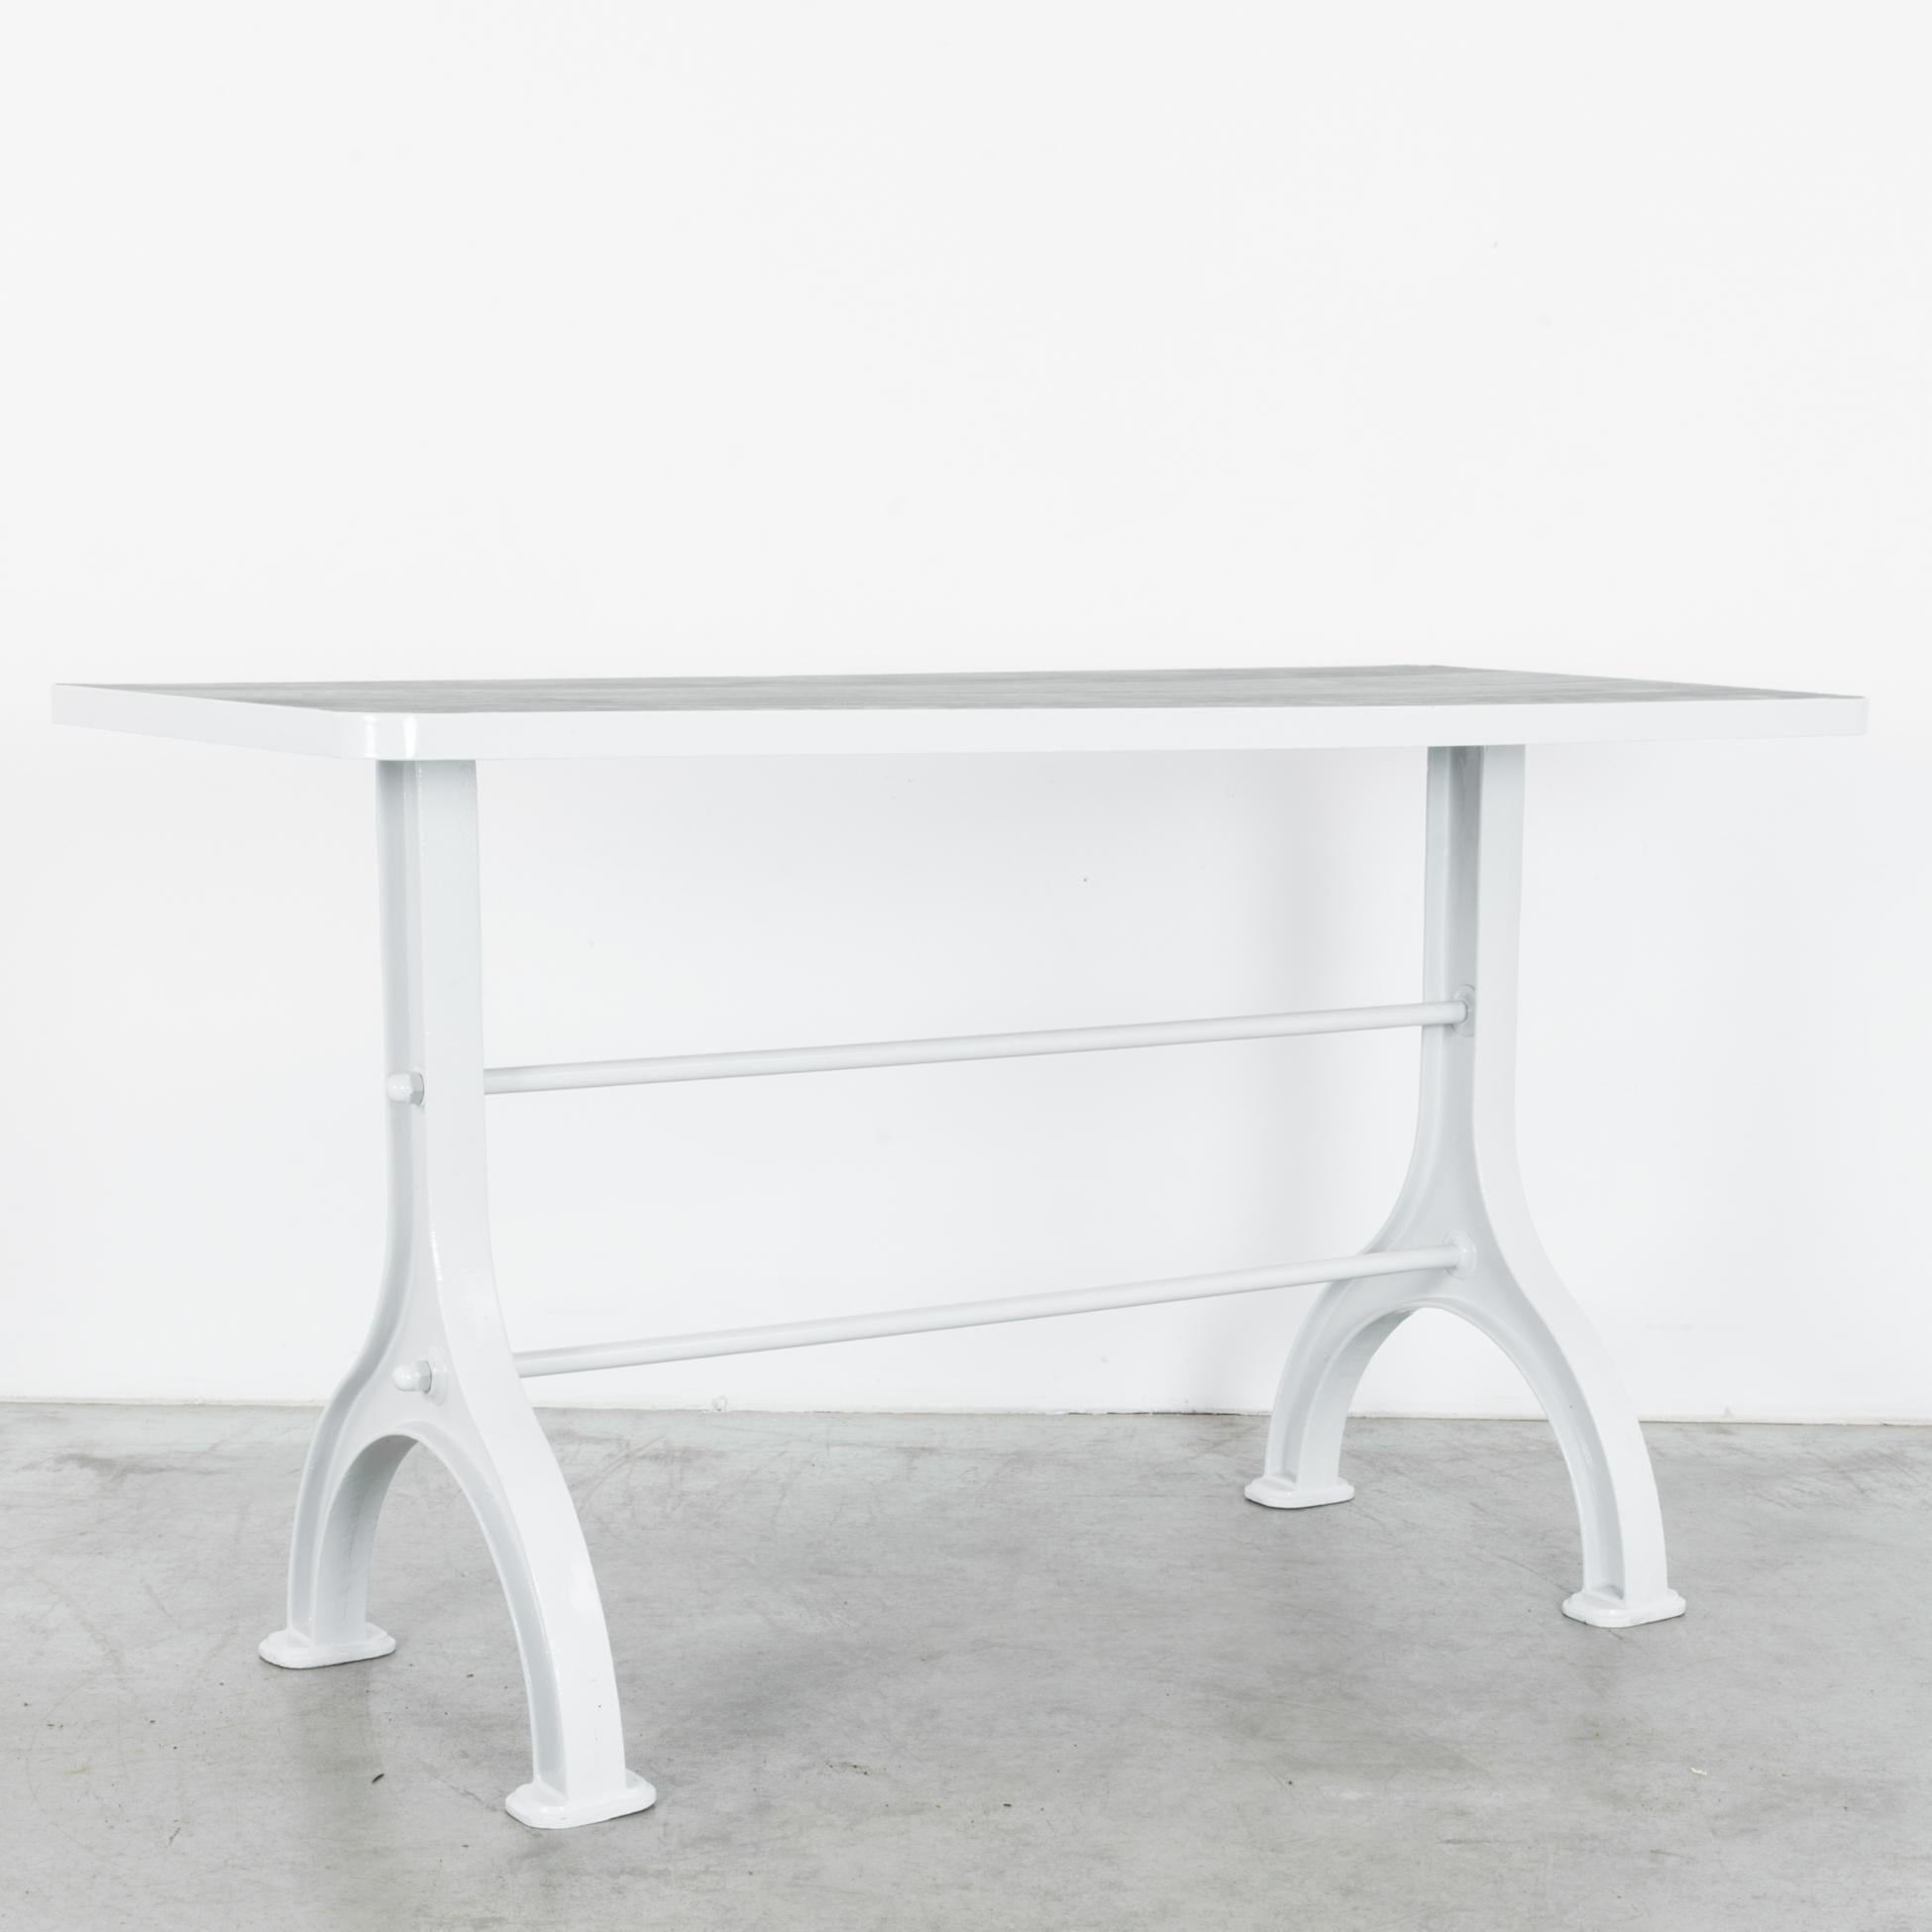 Metal Prototype Cast Iron and Wooden Table